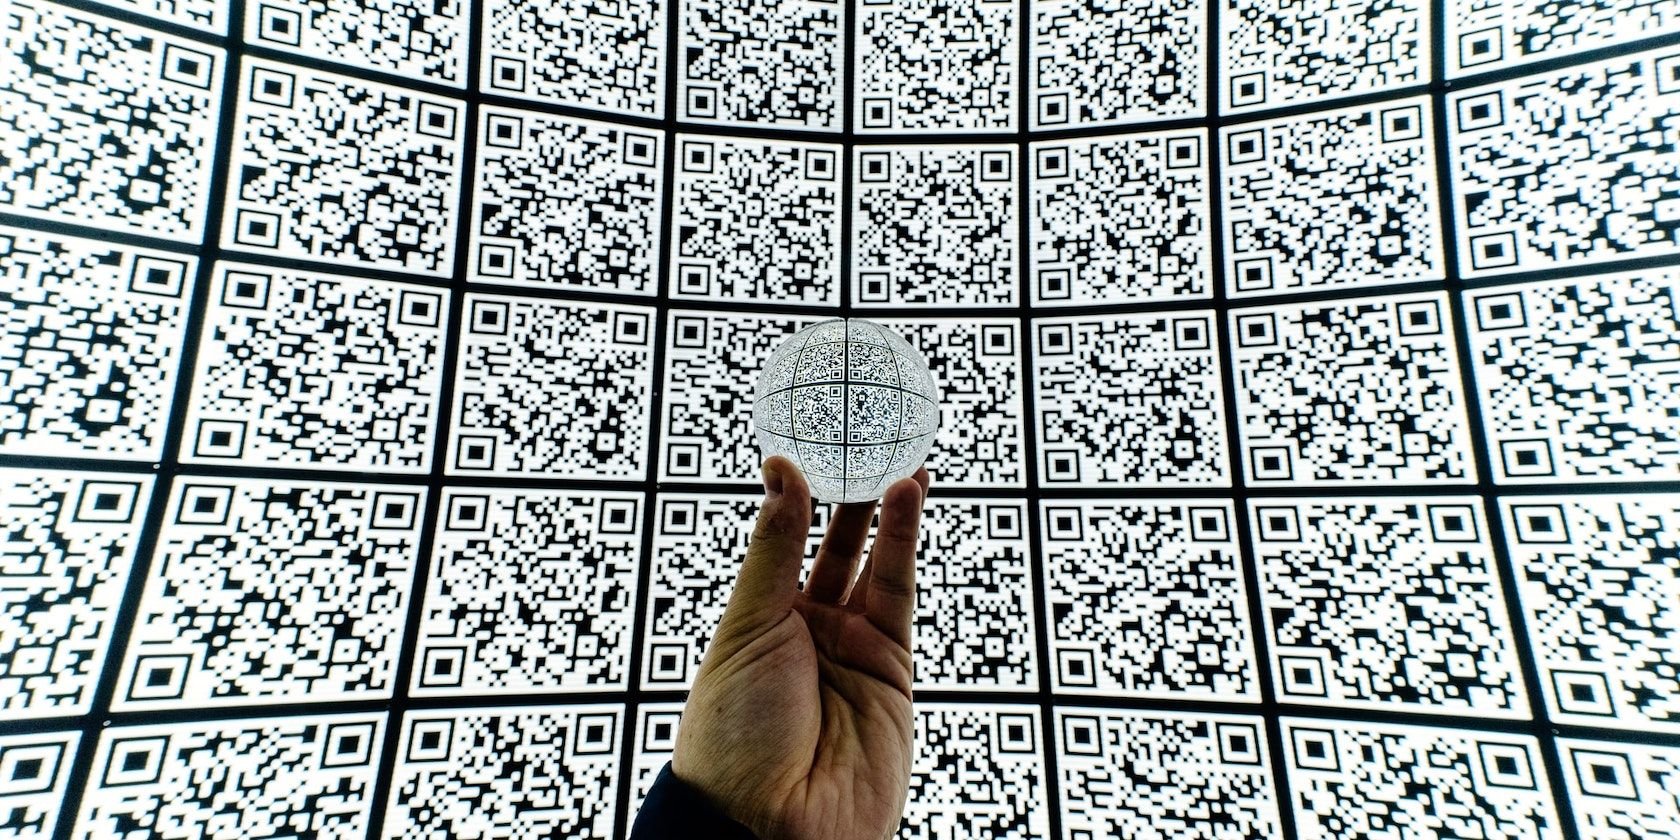 several qr codes on a screen